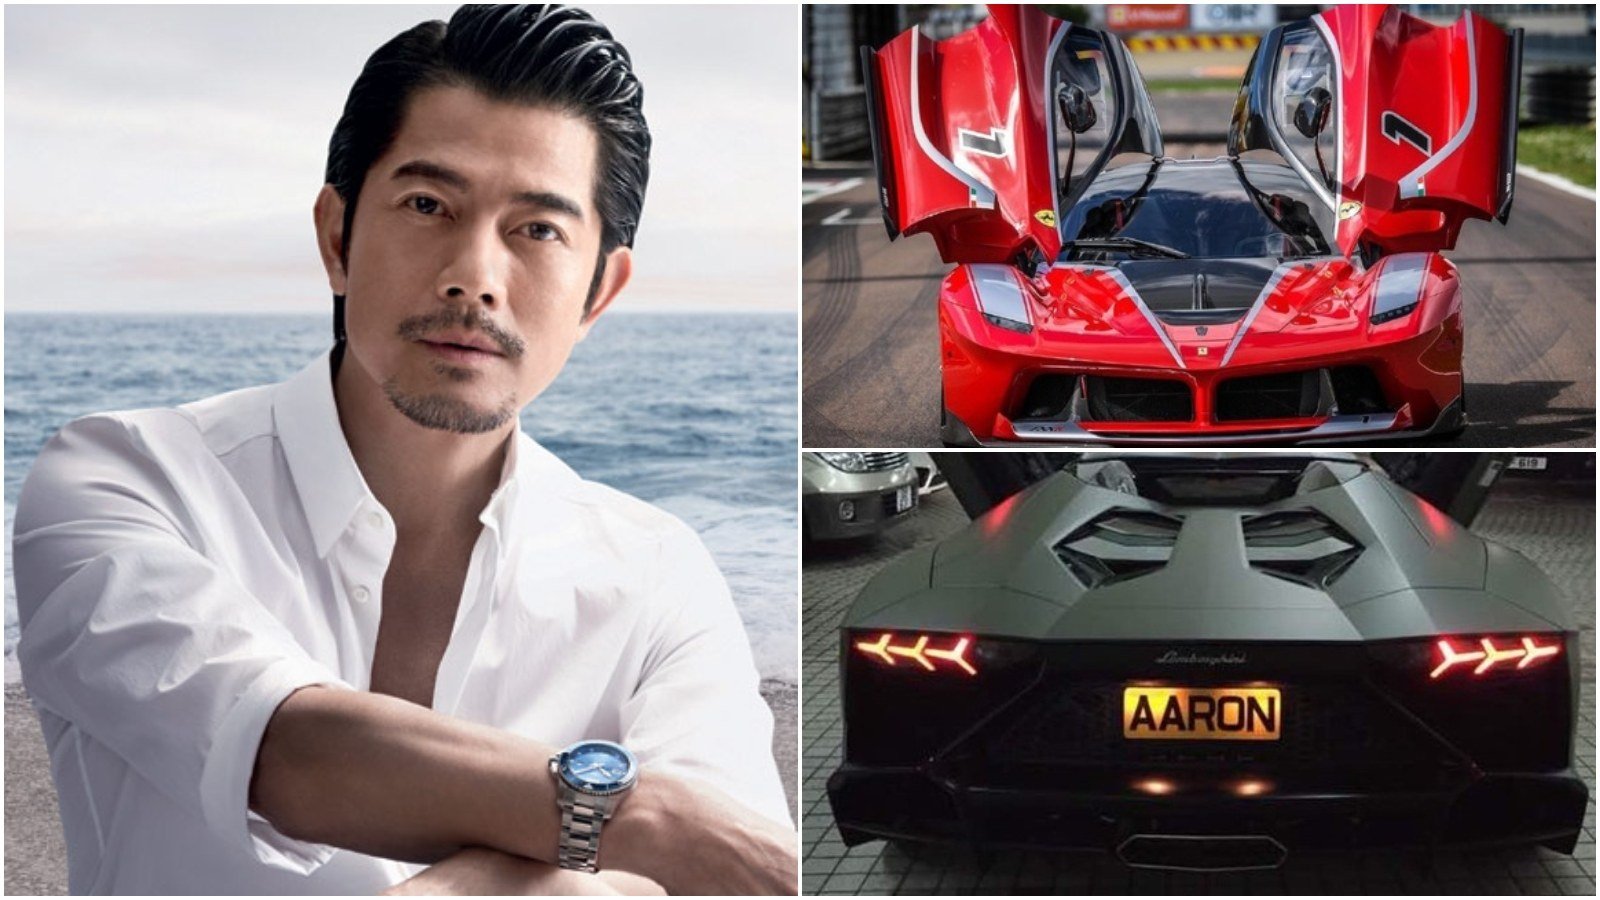 Aaron Kwok owns multiple Ferraris and Lamborghinis in his car collection. Photos: Handout, @aaronkwok/Weibo 